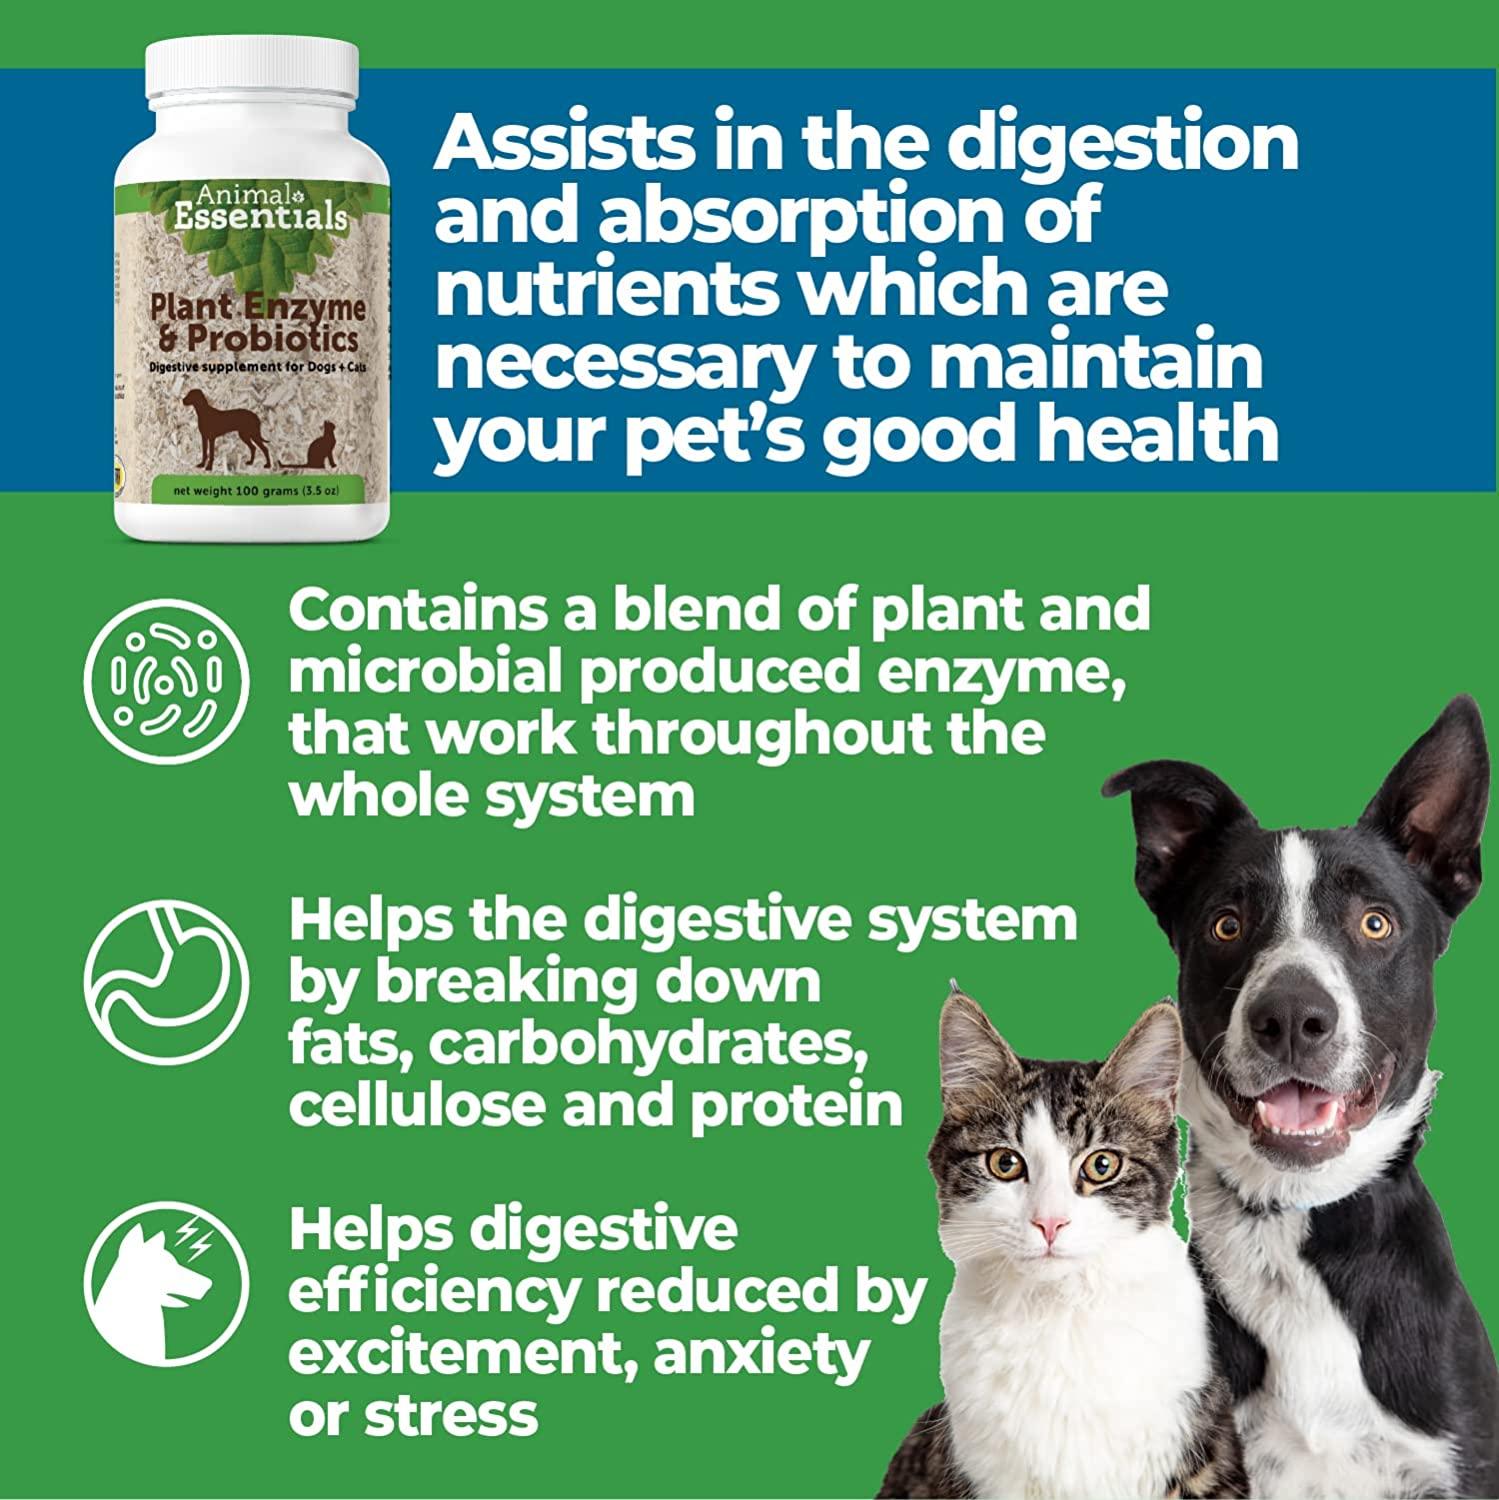 Animal Essentials Plant Enzyme & Probiotics For Dogs + Cats  oz (300 g)